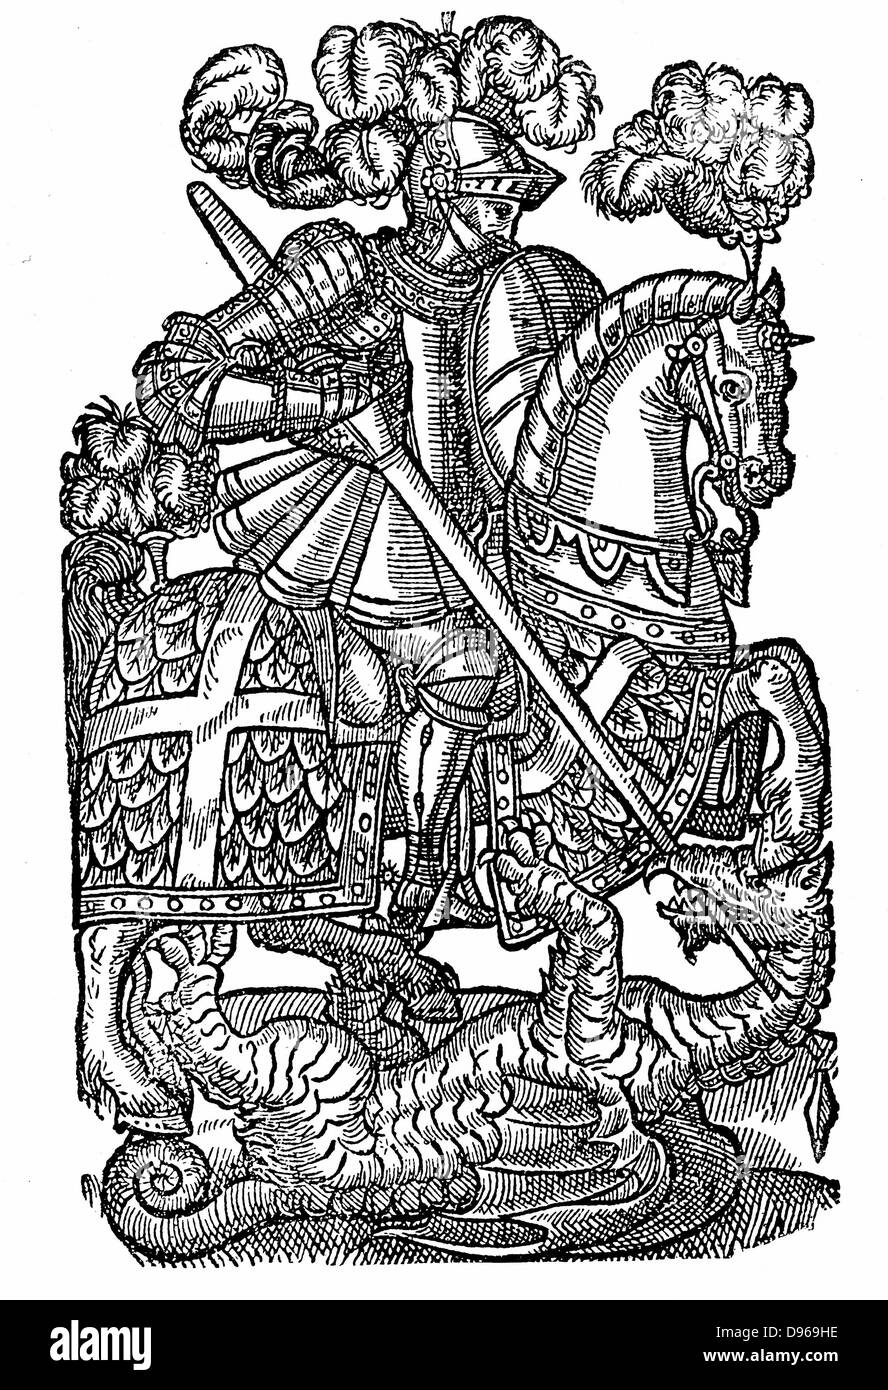 St George (dc303), the Red Cross Knight,  killing the Dragon. Perhaps Roman centurion beheaded near modern Tel Aviv. Patron saint of  England, Catalonia, Genoa, Greece, Portugal, Russia, Venice, and of soldiers. Woodcut from 1598 edition of Edmund Spenser (c1552-1599) 'The Faerie Queene'. Stock Photo